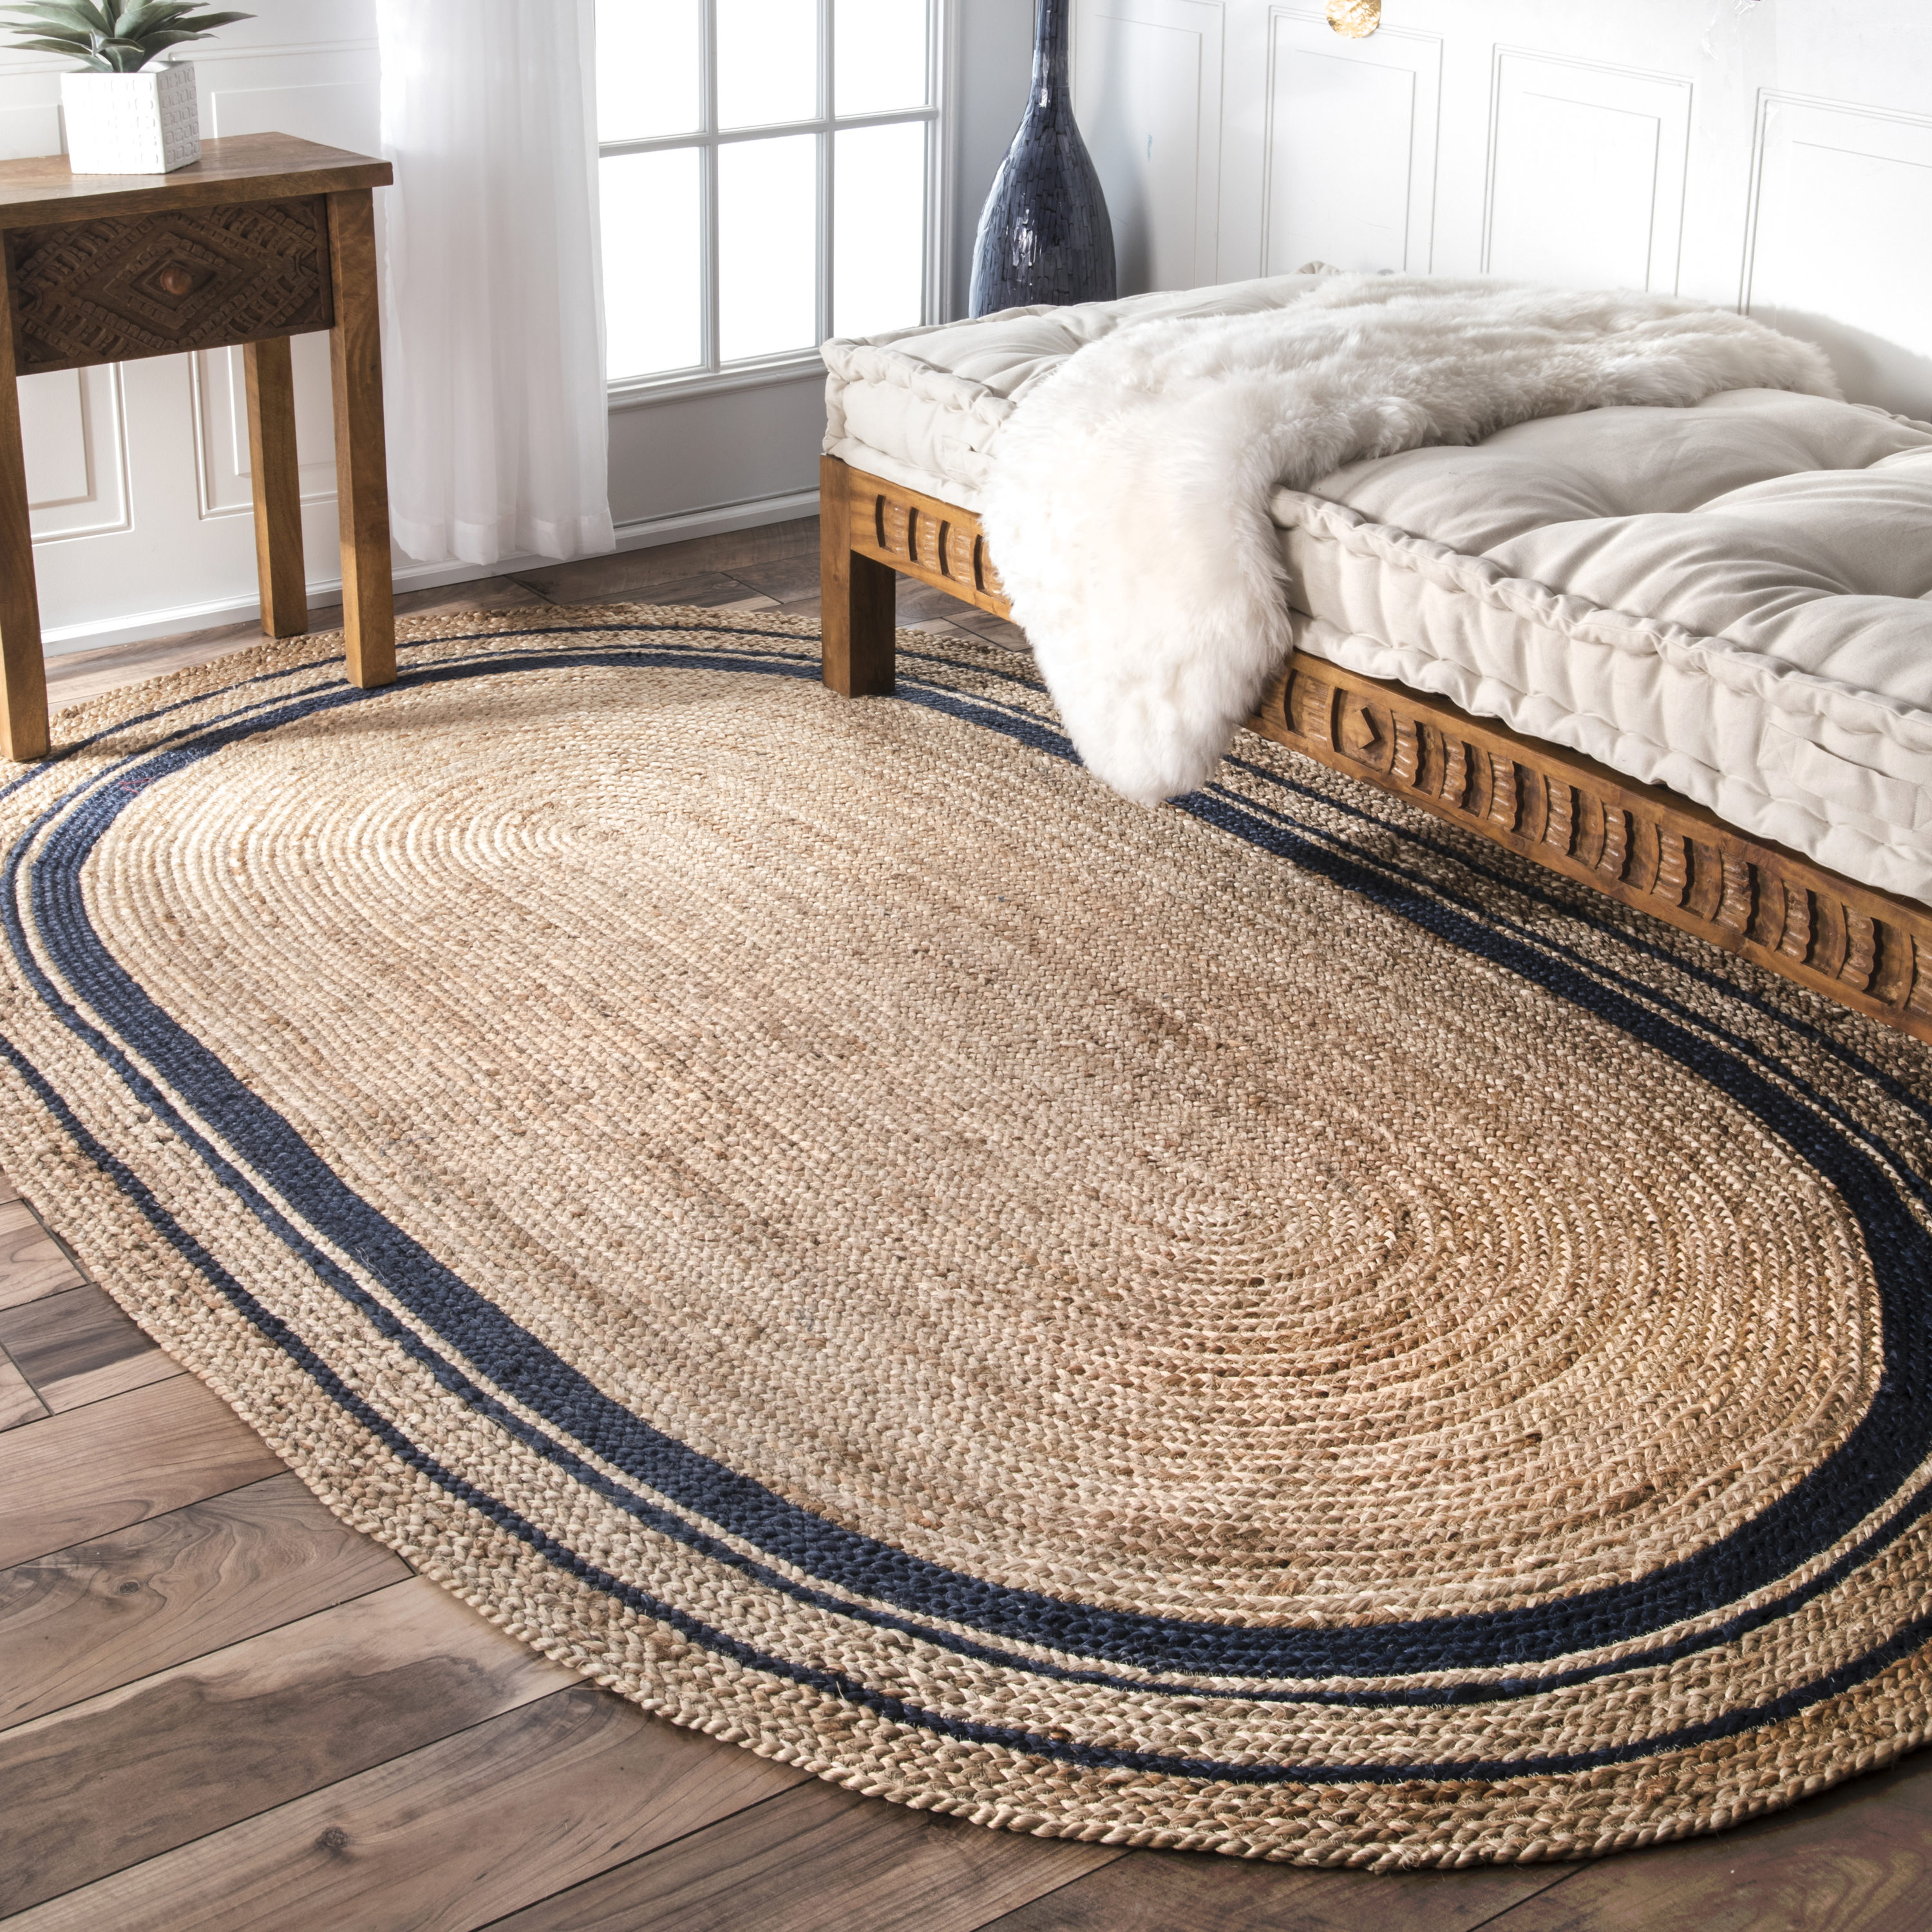 Oval Braided Rugs at